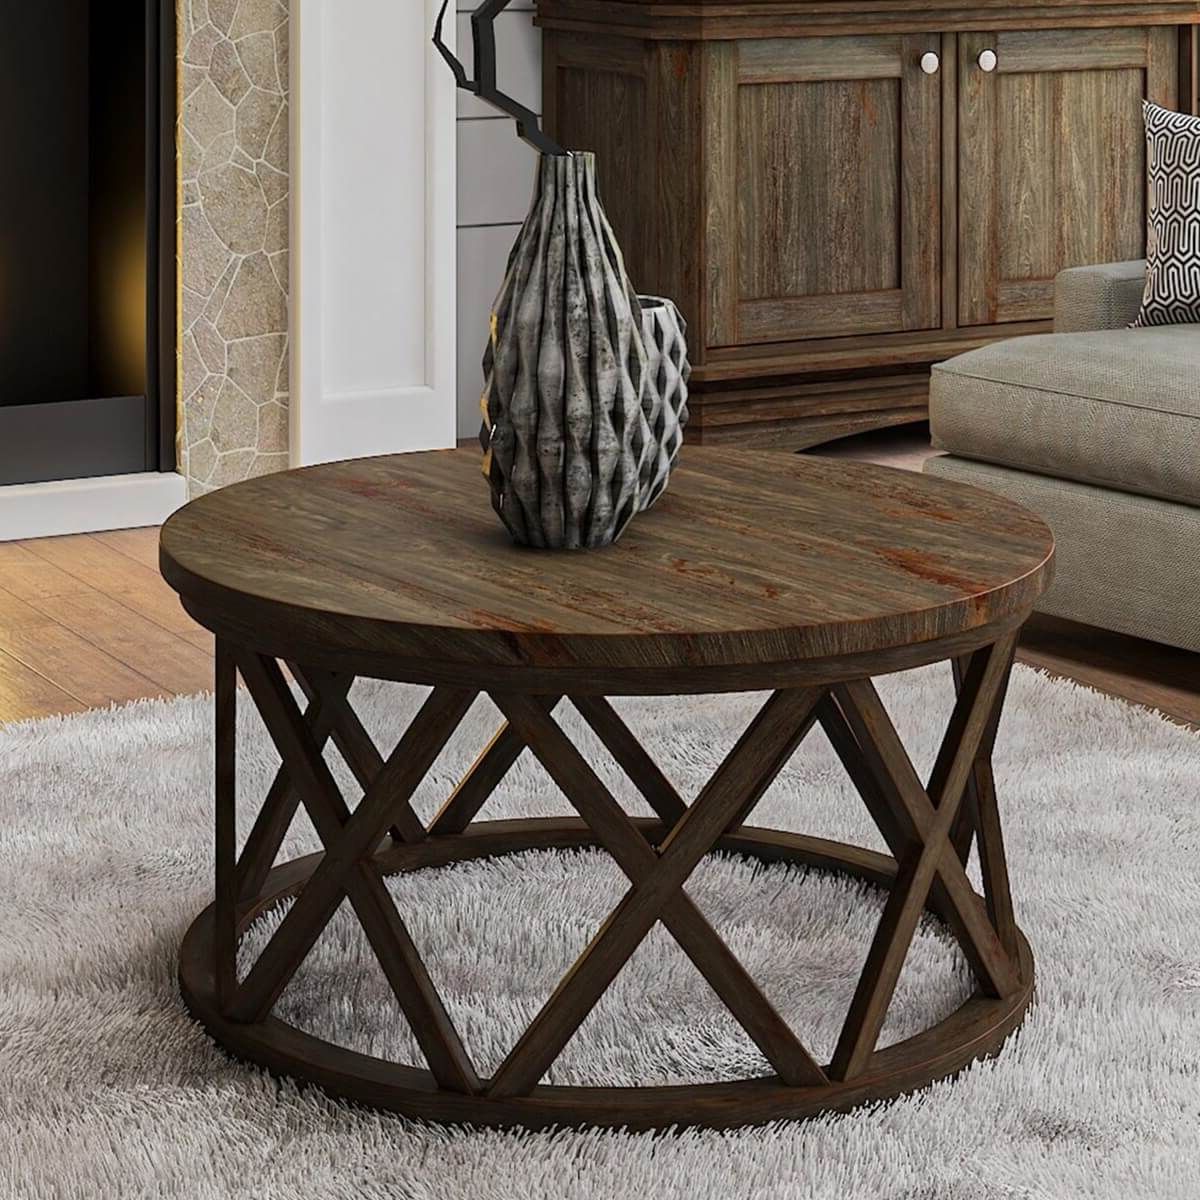 Mariefred Rustic Transitional Style Teak Wood Round Coffee Table Inside Preferred Rustic Round Coffee Tables (View 8 of 20)